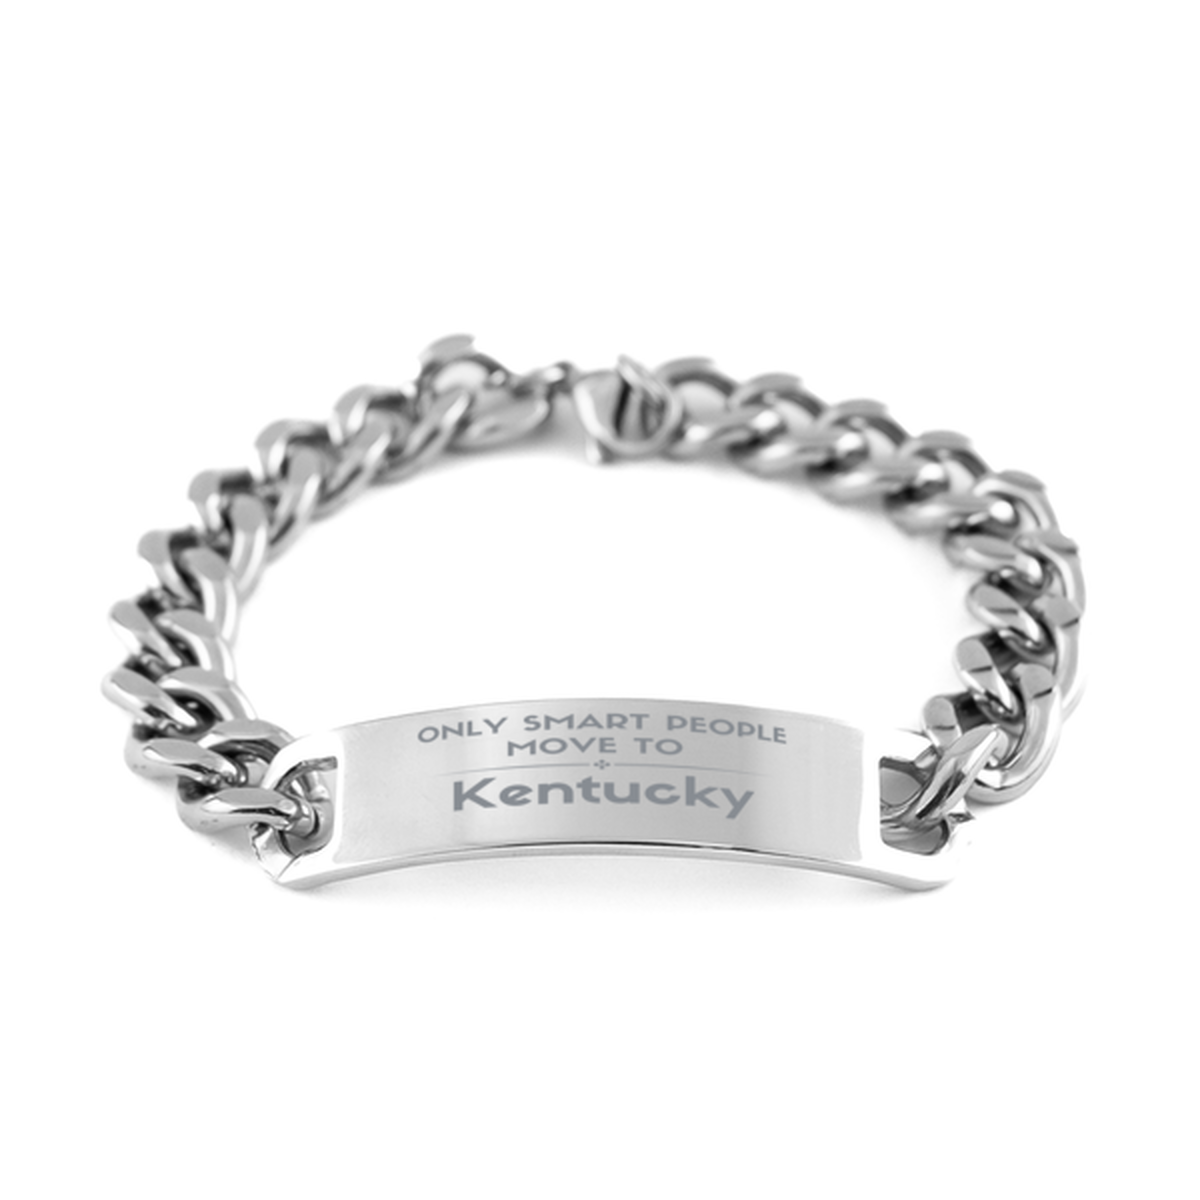 Only smart people move to Kentucky Cuban Chain Stainless Steel Bracelet, Gag Gifts For Kentucky, Move to Kentucky Gifts for Friends Coworker Funny Saying Quote